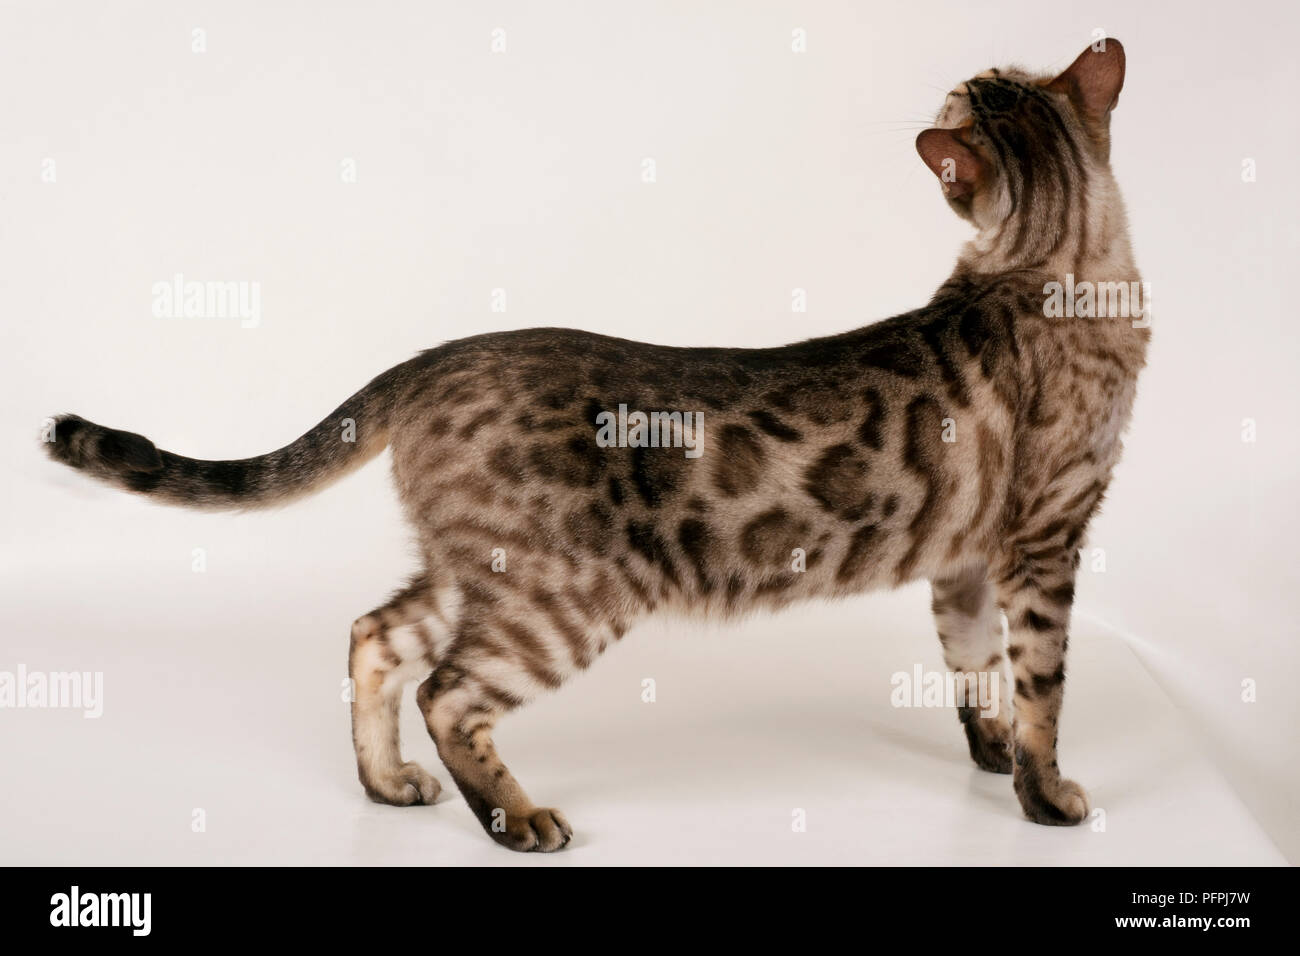 Brown rosetted Bengal cat, standing, looking away, side view Stock Photo